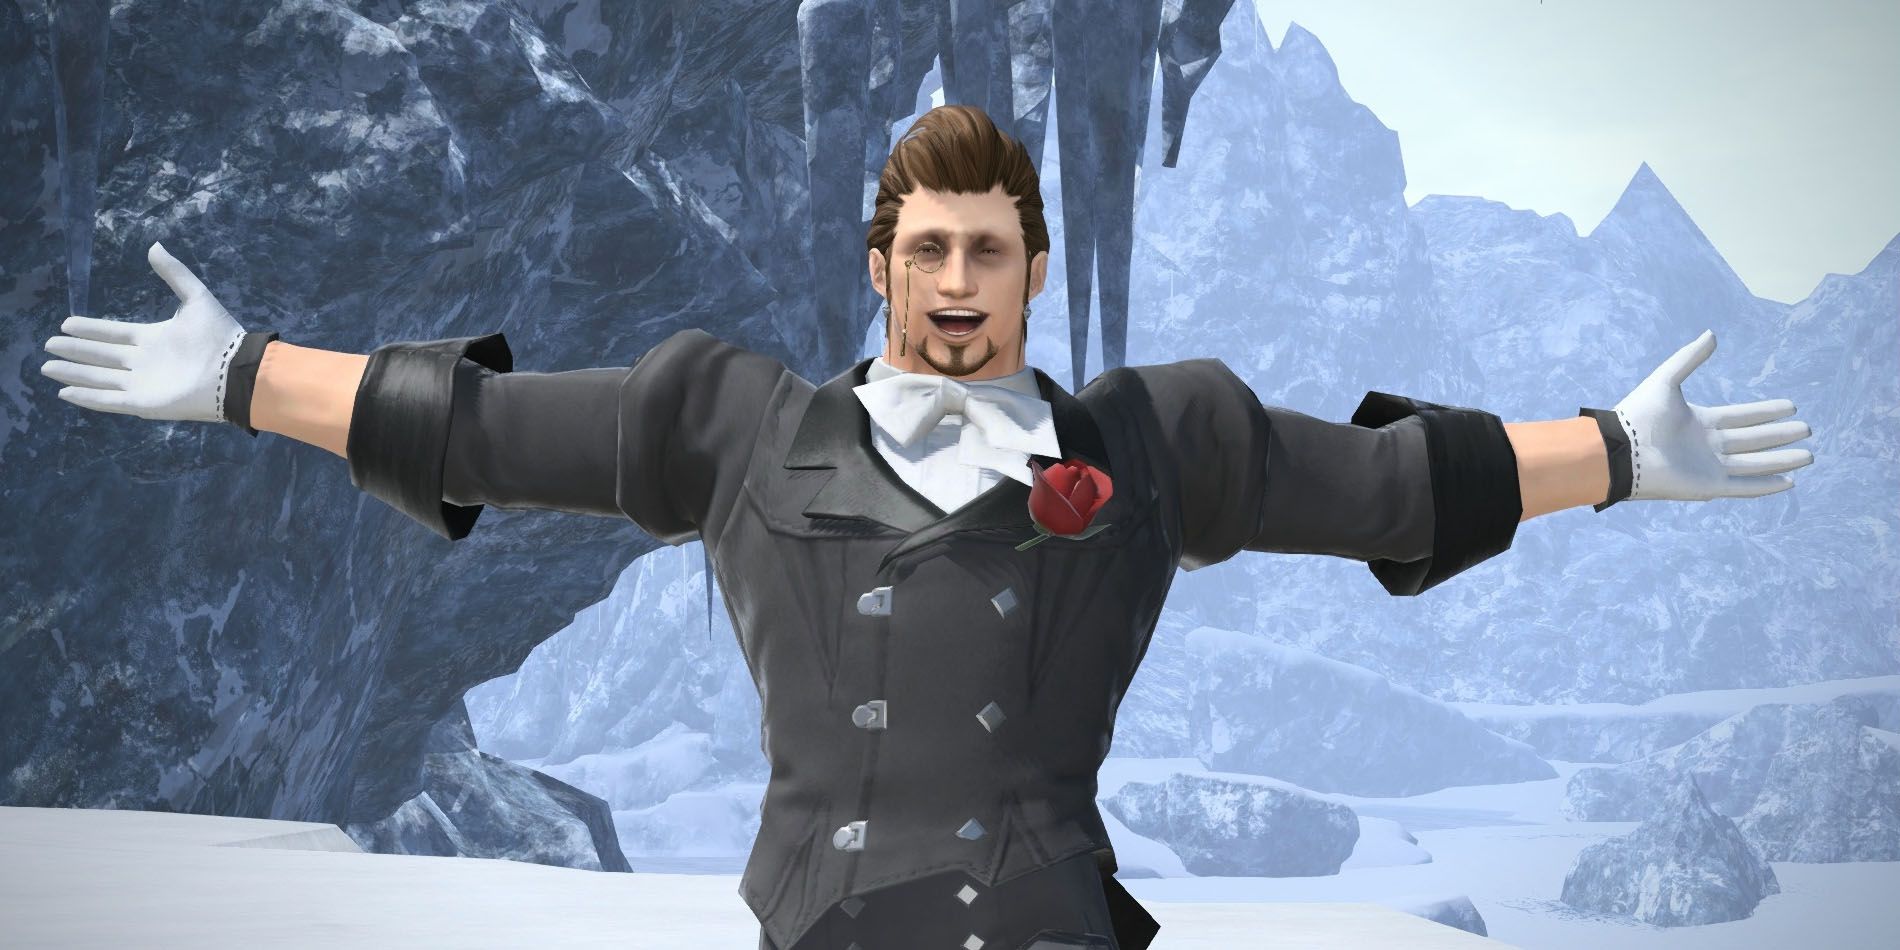 Hildibrand Manderville welcomes all to Heavensward